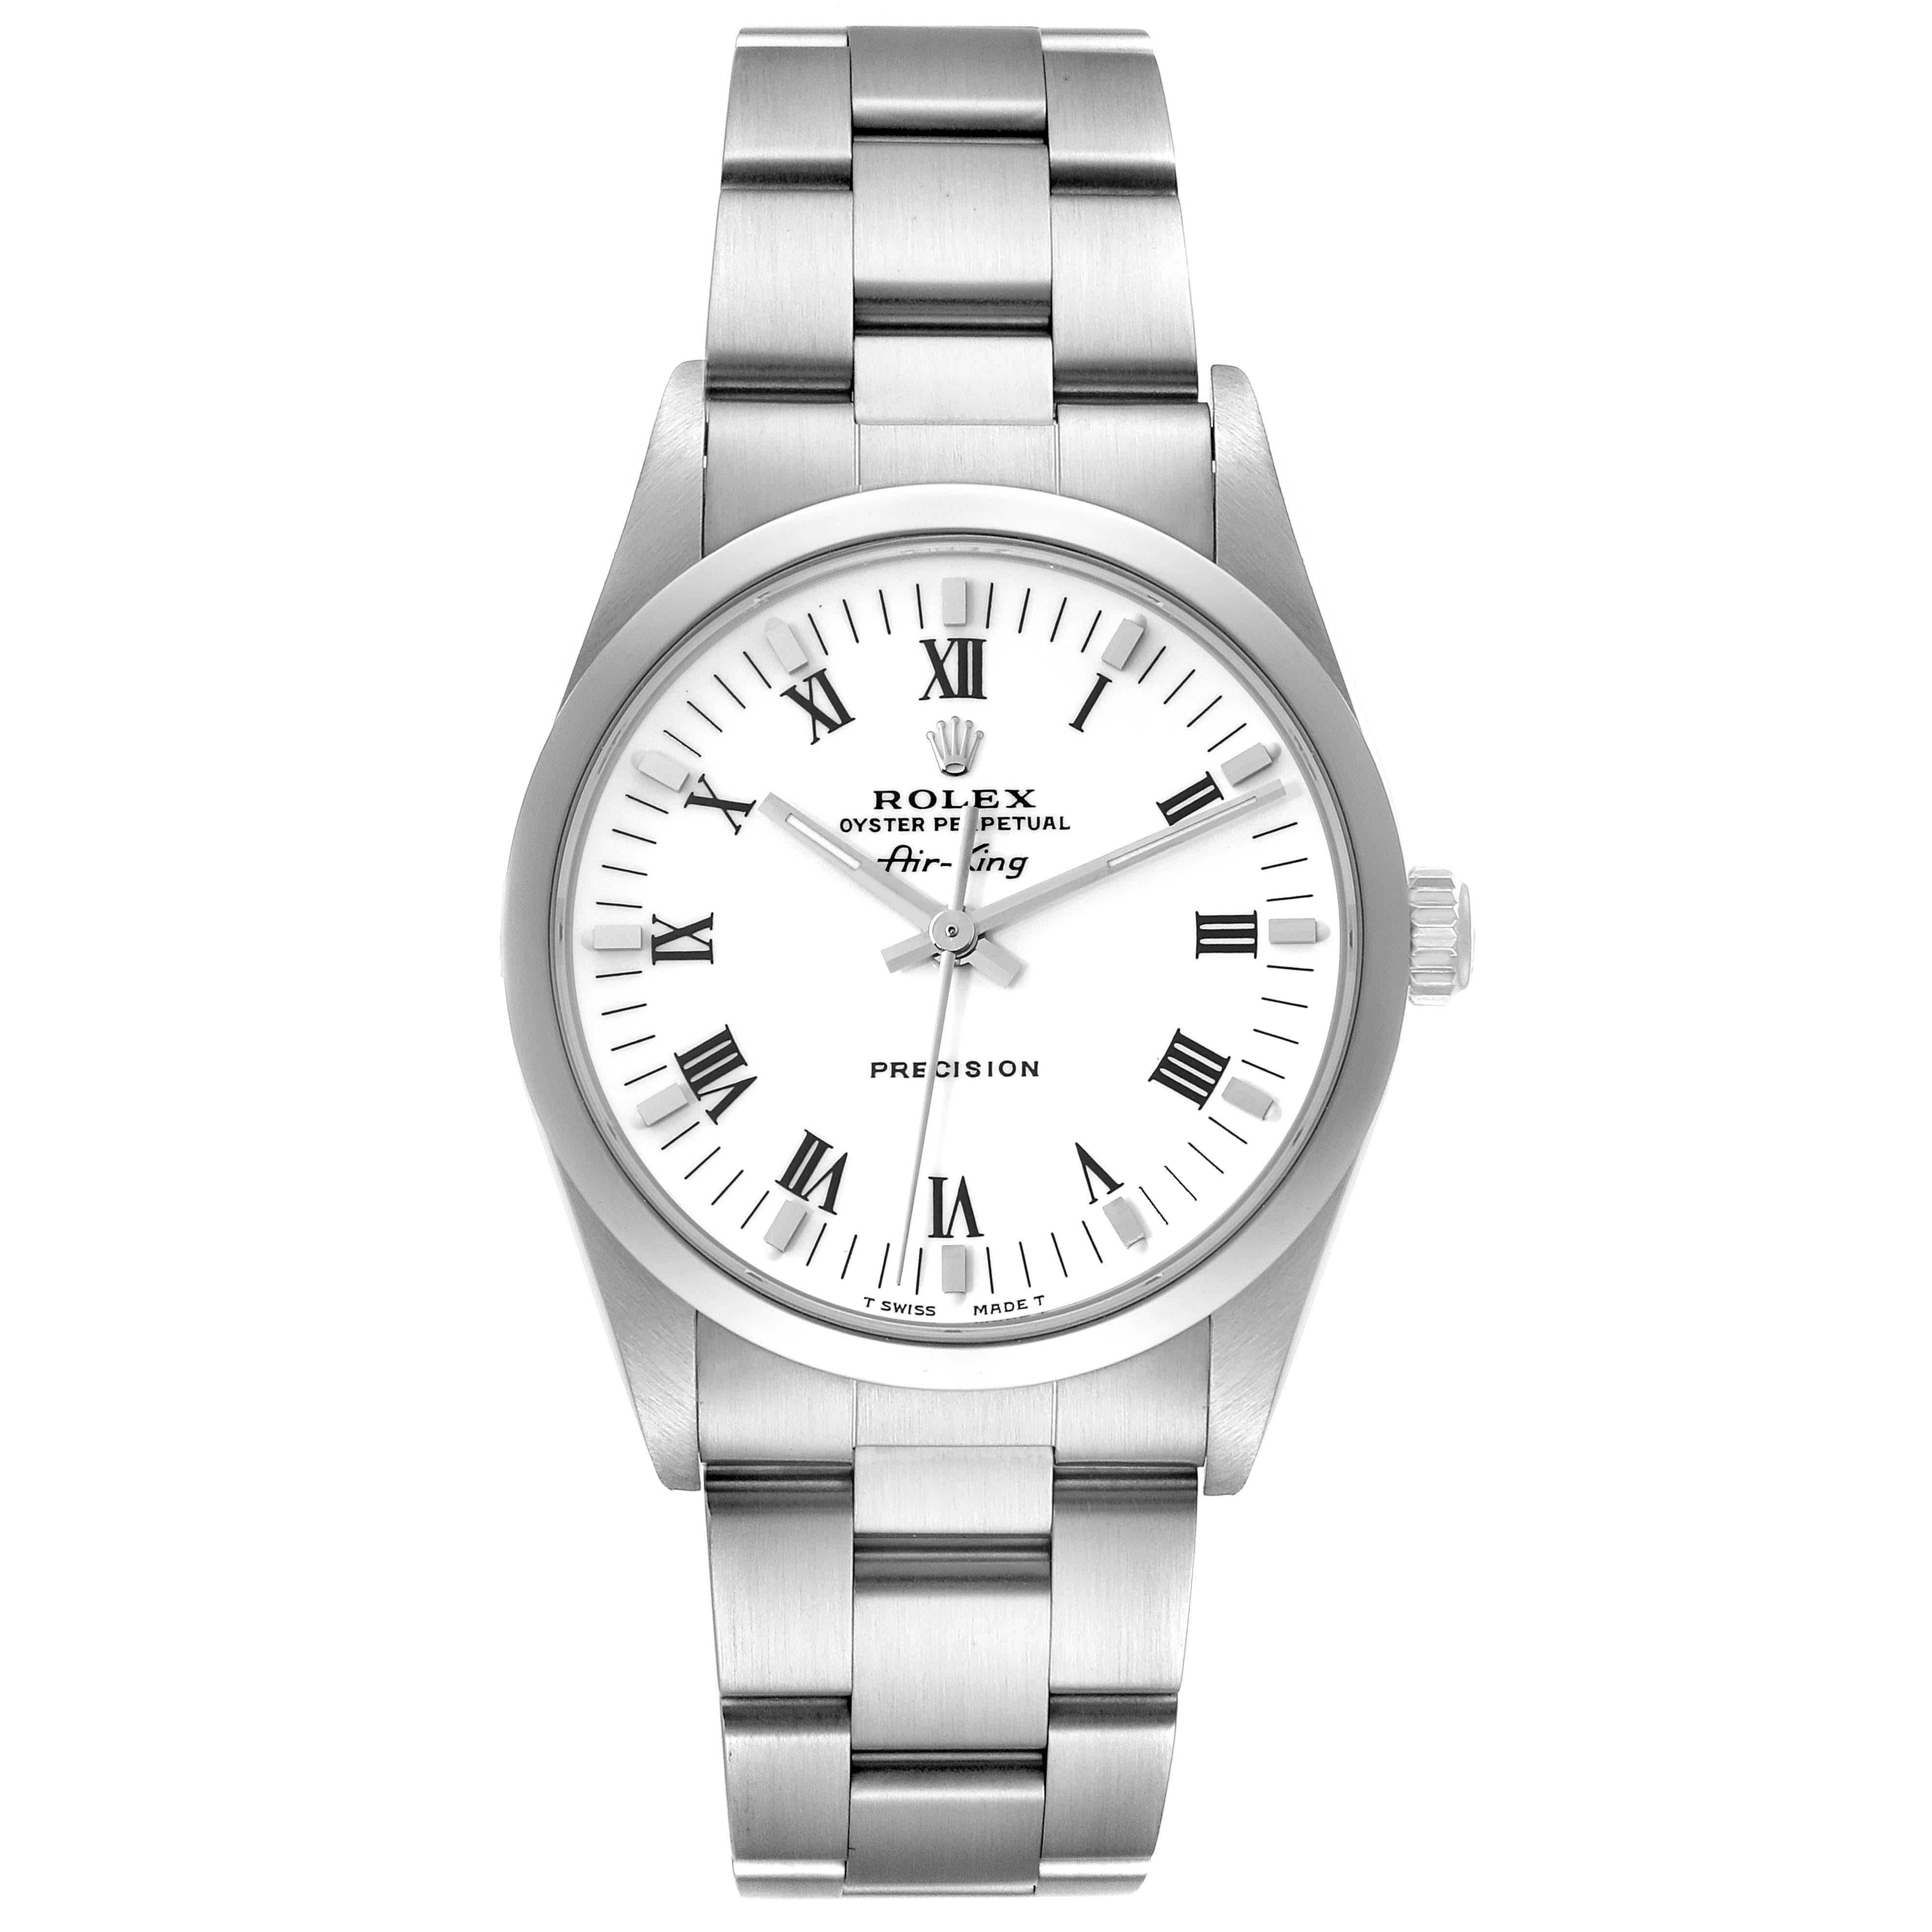 Rolex Air King White Dial Smooth Bezel Steel Mens Watch 14000 Box Papers. Automatic self-winding movement. Stainless steel case 34 mm in diameter. Rolex logo on the crown. Stainless steel smooth bezel. Scratch resistant sapphire crystal. White dial